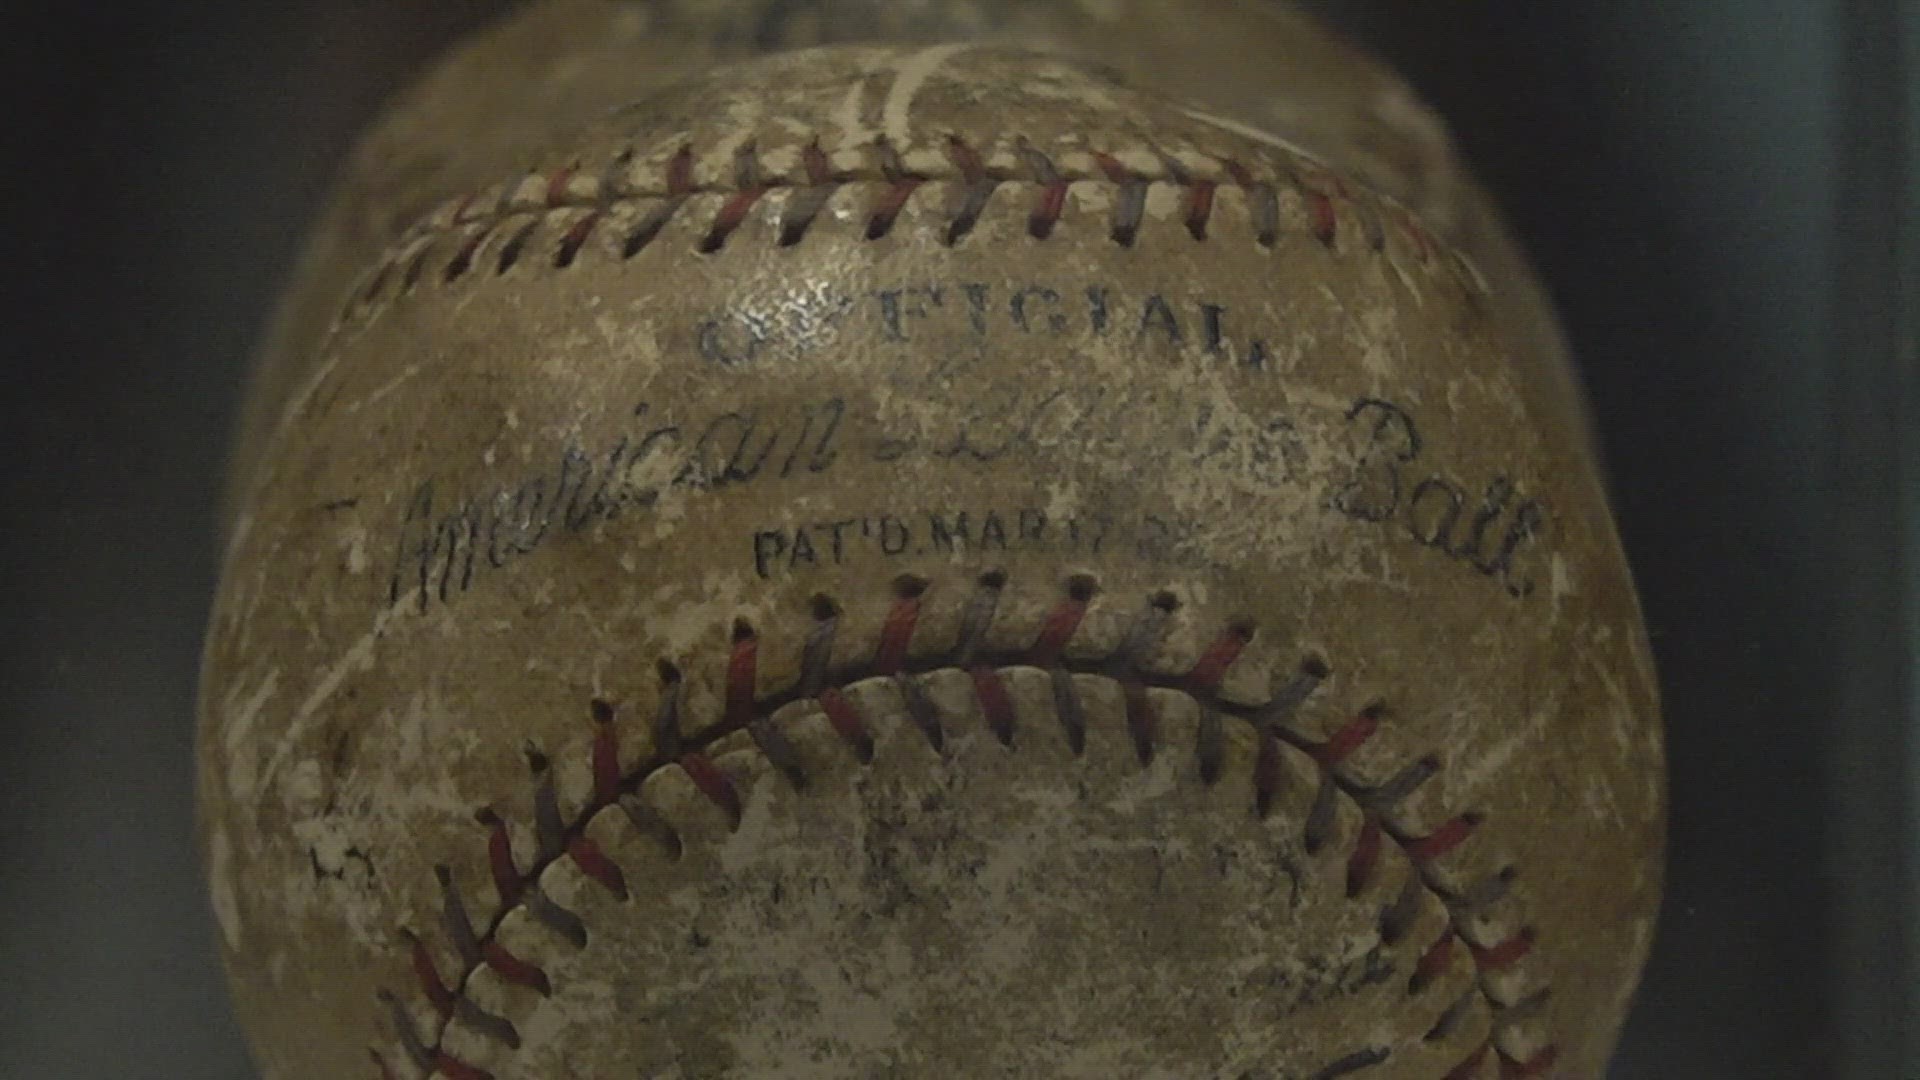 Morristown native Jamison Pack has turned his baseball memorabilia collection into a museum for all to enjoy.